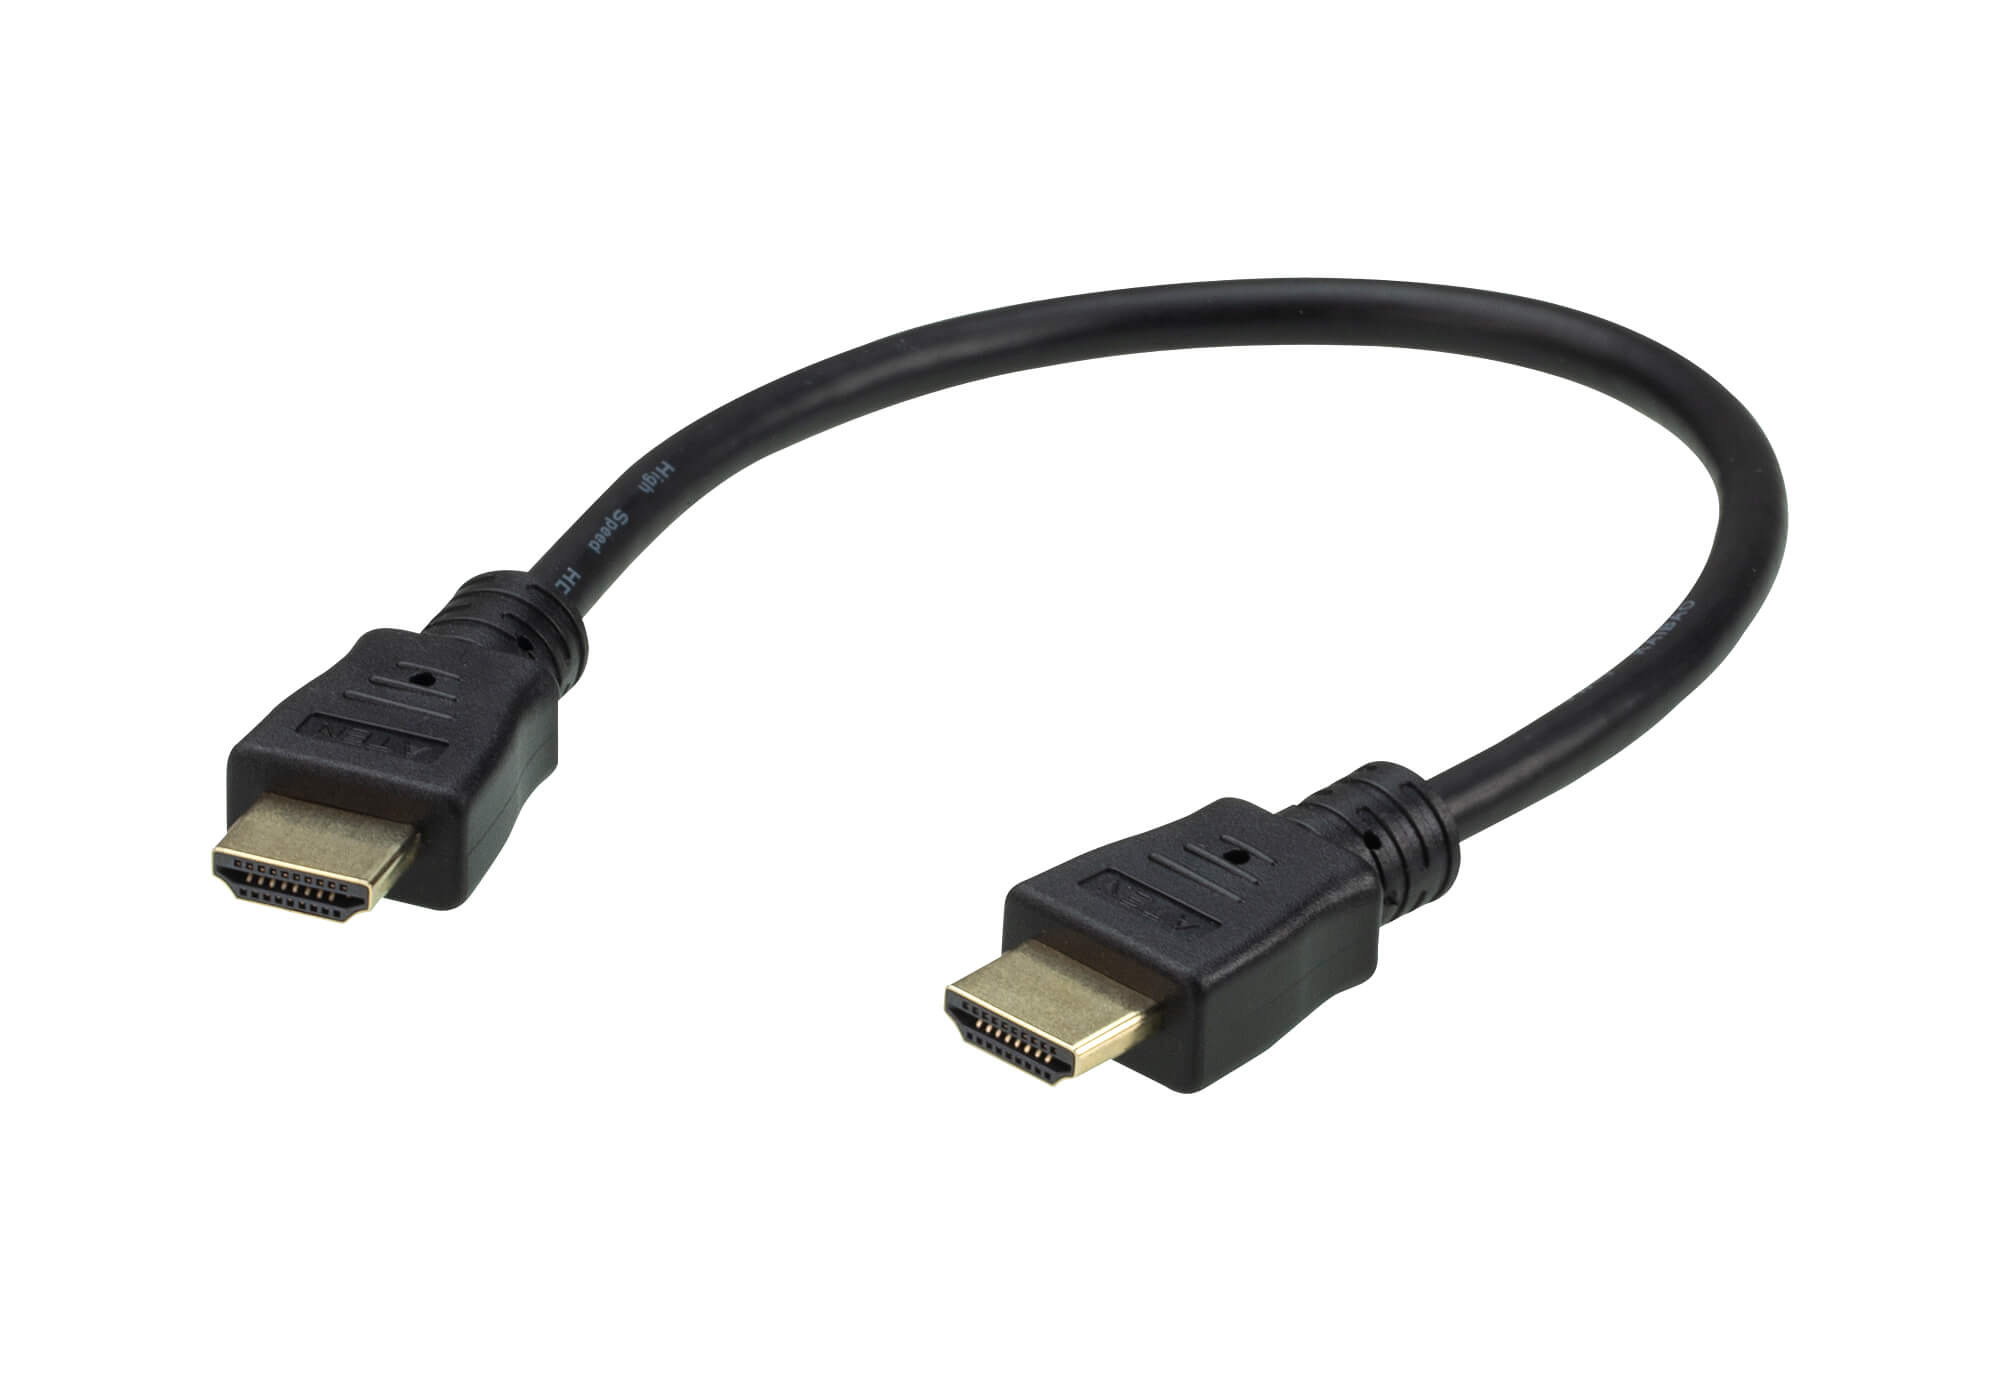 Aten 0.3m 4K HDMI High Speed Ethernet cable, supports up to 4096 x 2160 @ 60Hz, High quality tinned copper wire with Gold-plated connectors